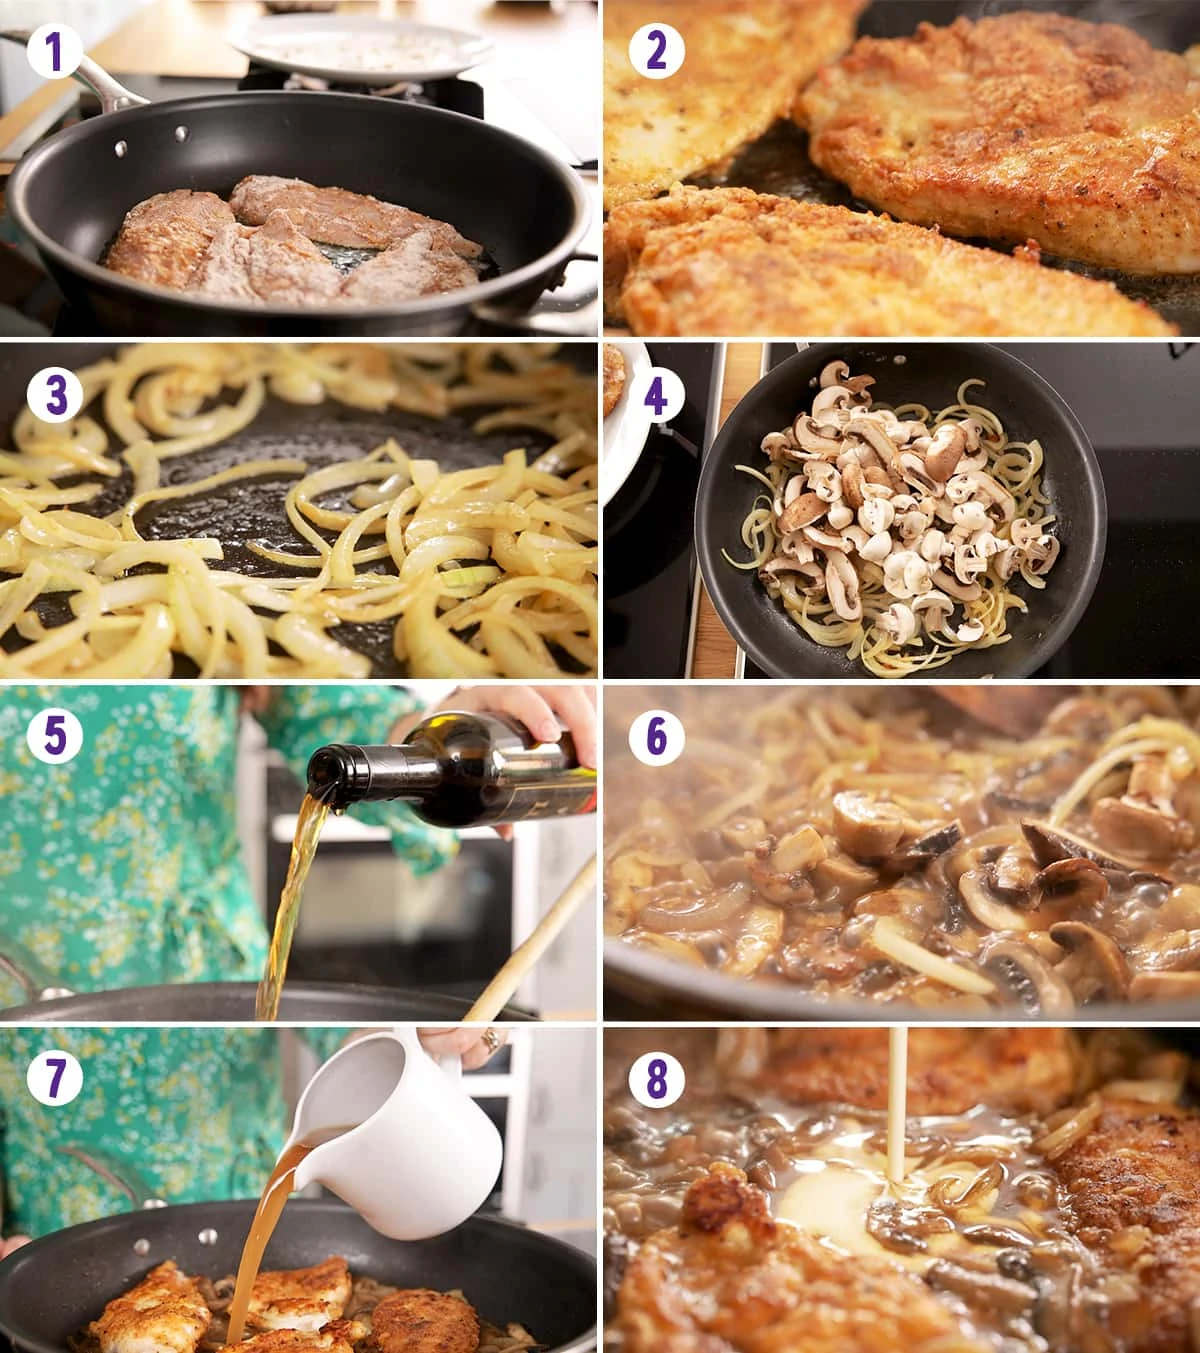 8 image collage showing how to make chicken marsala